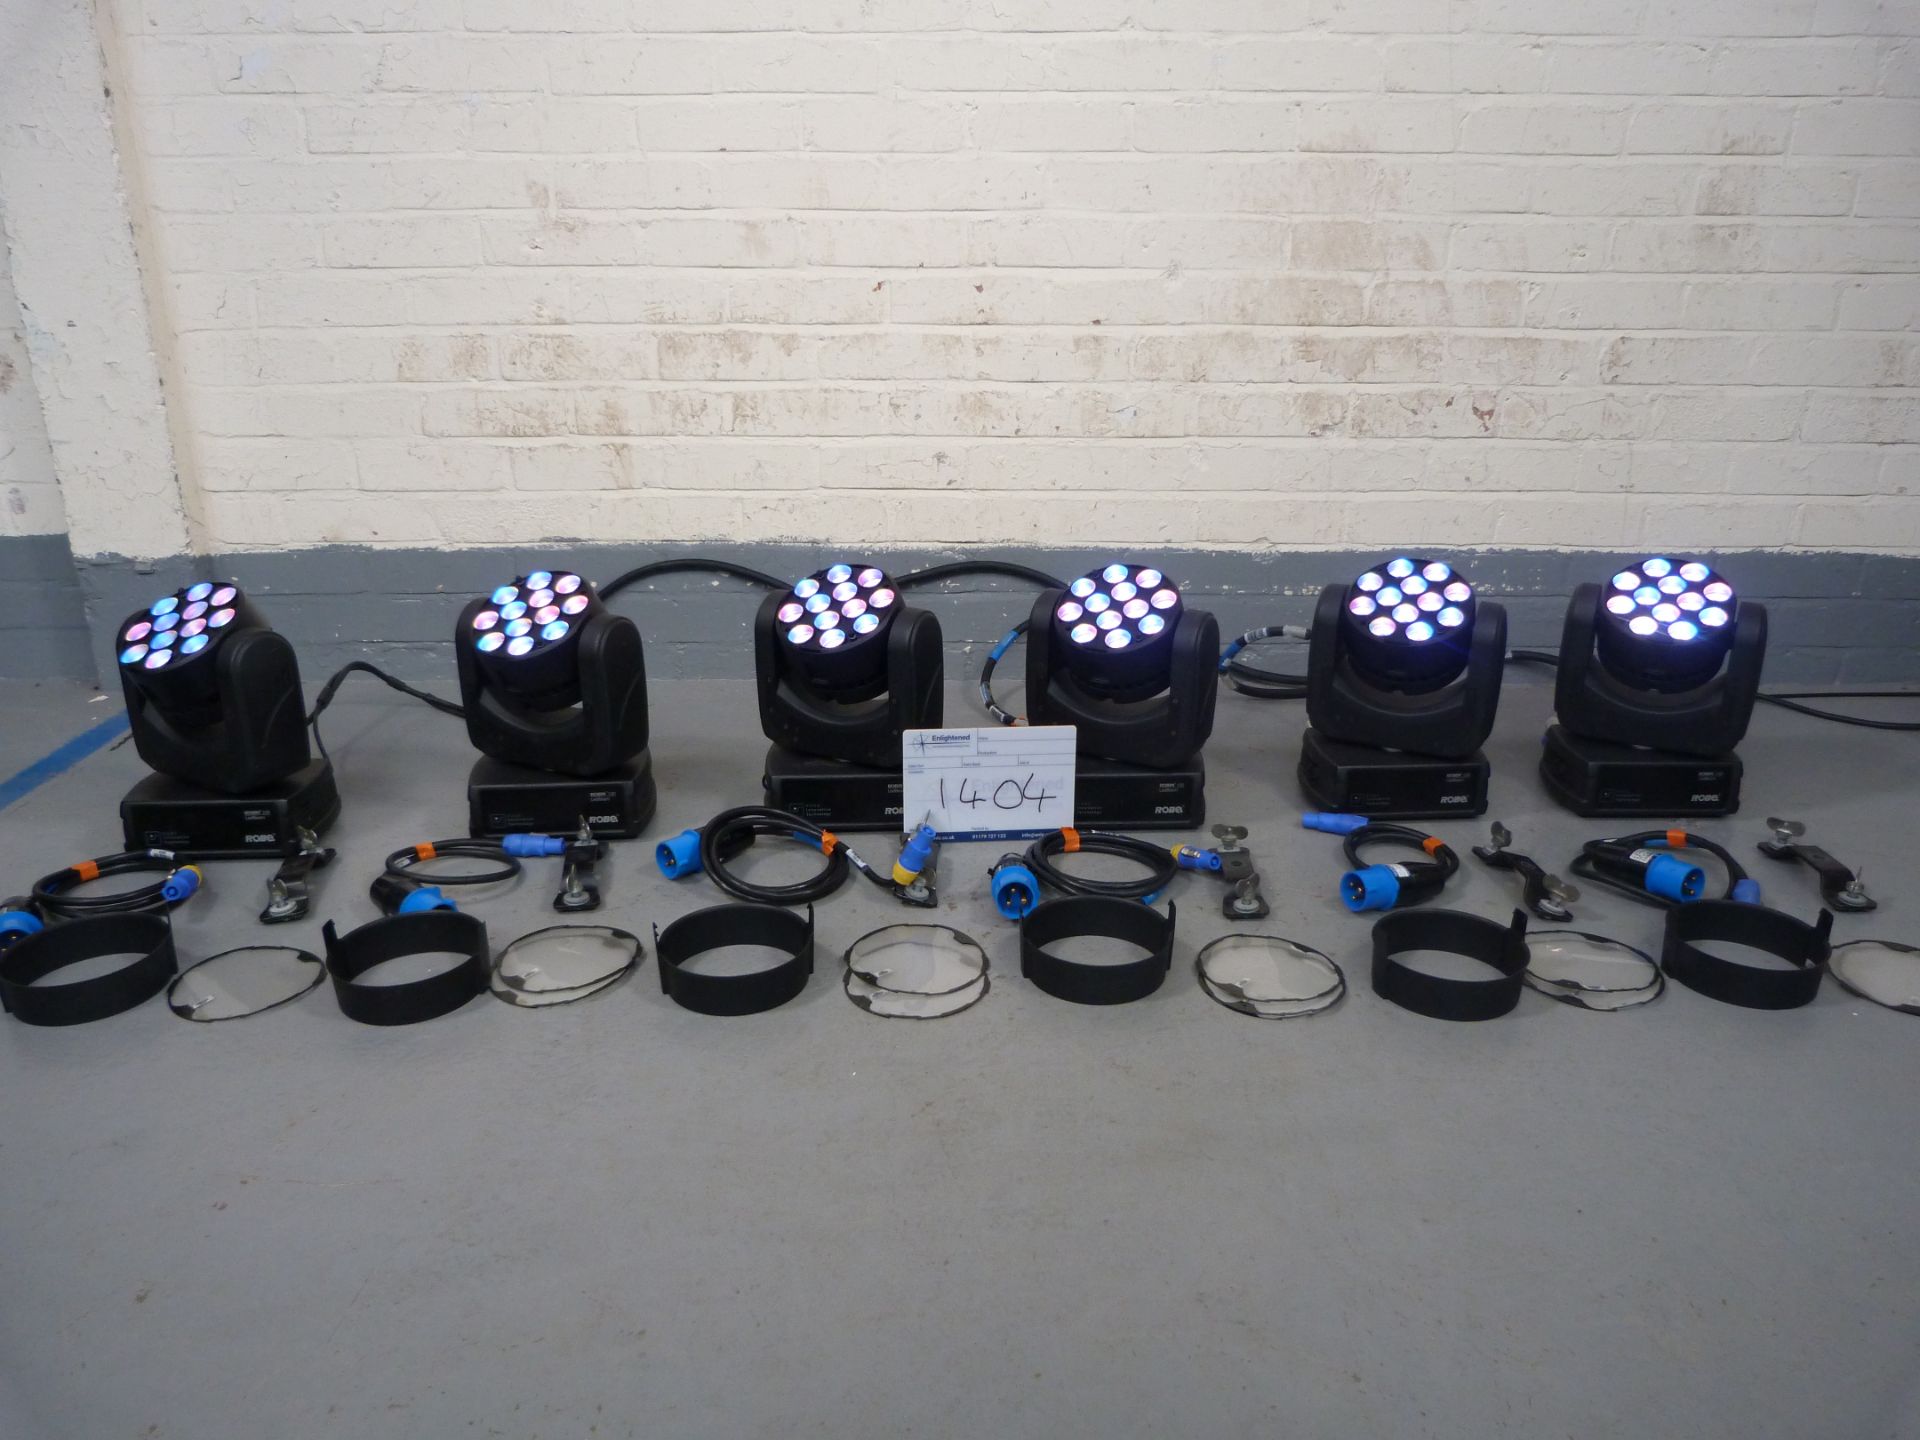 Robe Robin 100 LEDBeam - Case of Six Including Accessories. Ex-hire/Good Condition. Power On Time: